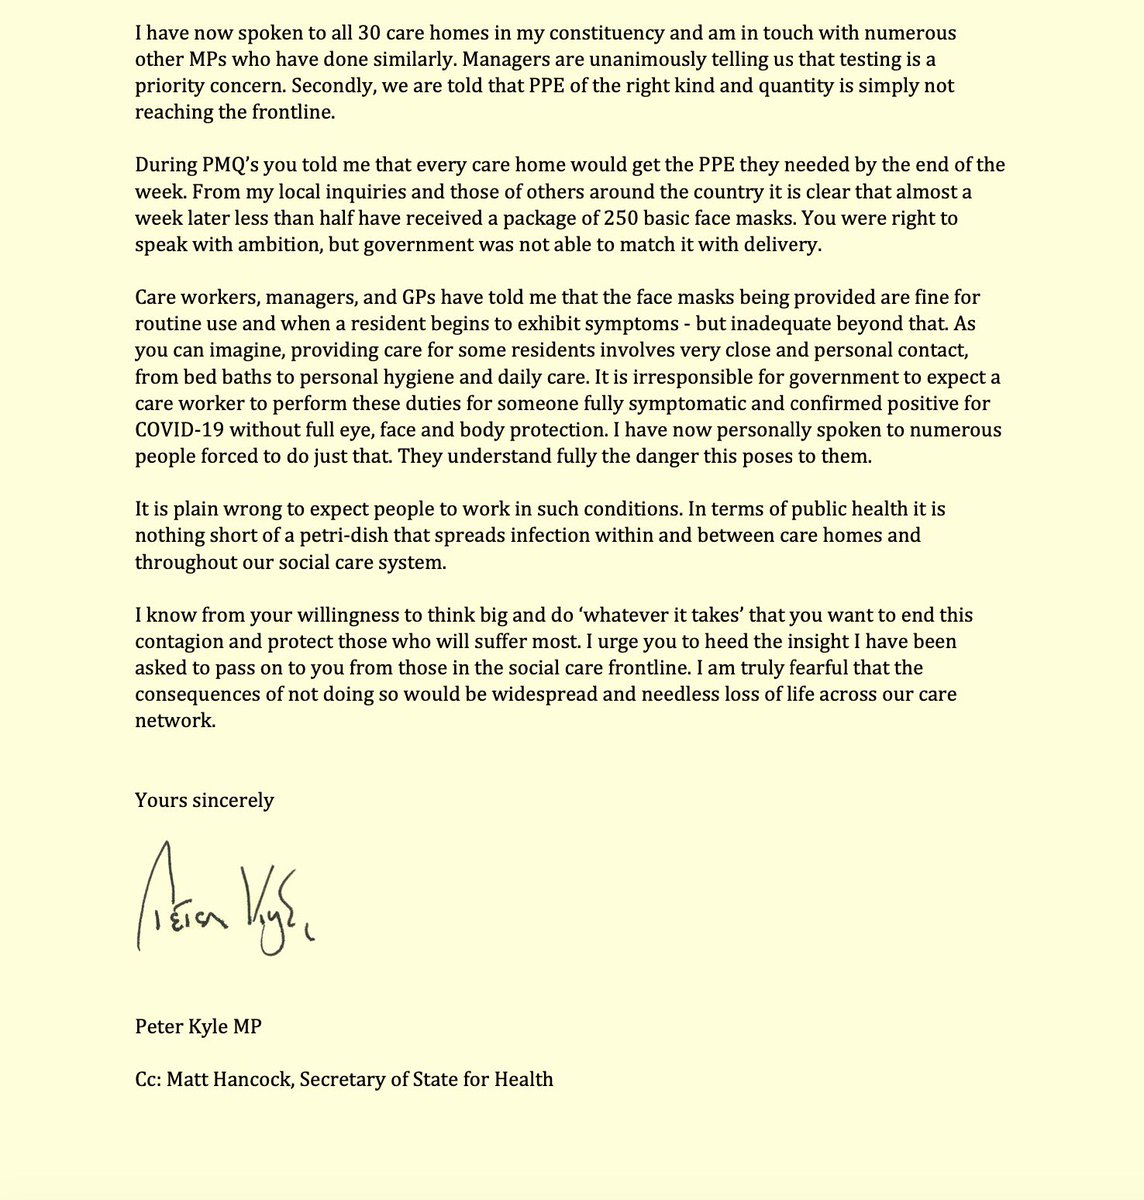 I wrote to  @BorisJohnson and  @MattHancock weeks ago telling them this: “our system of social care, dependent as it is on agency staff, is responsible for spreading contagion”